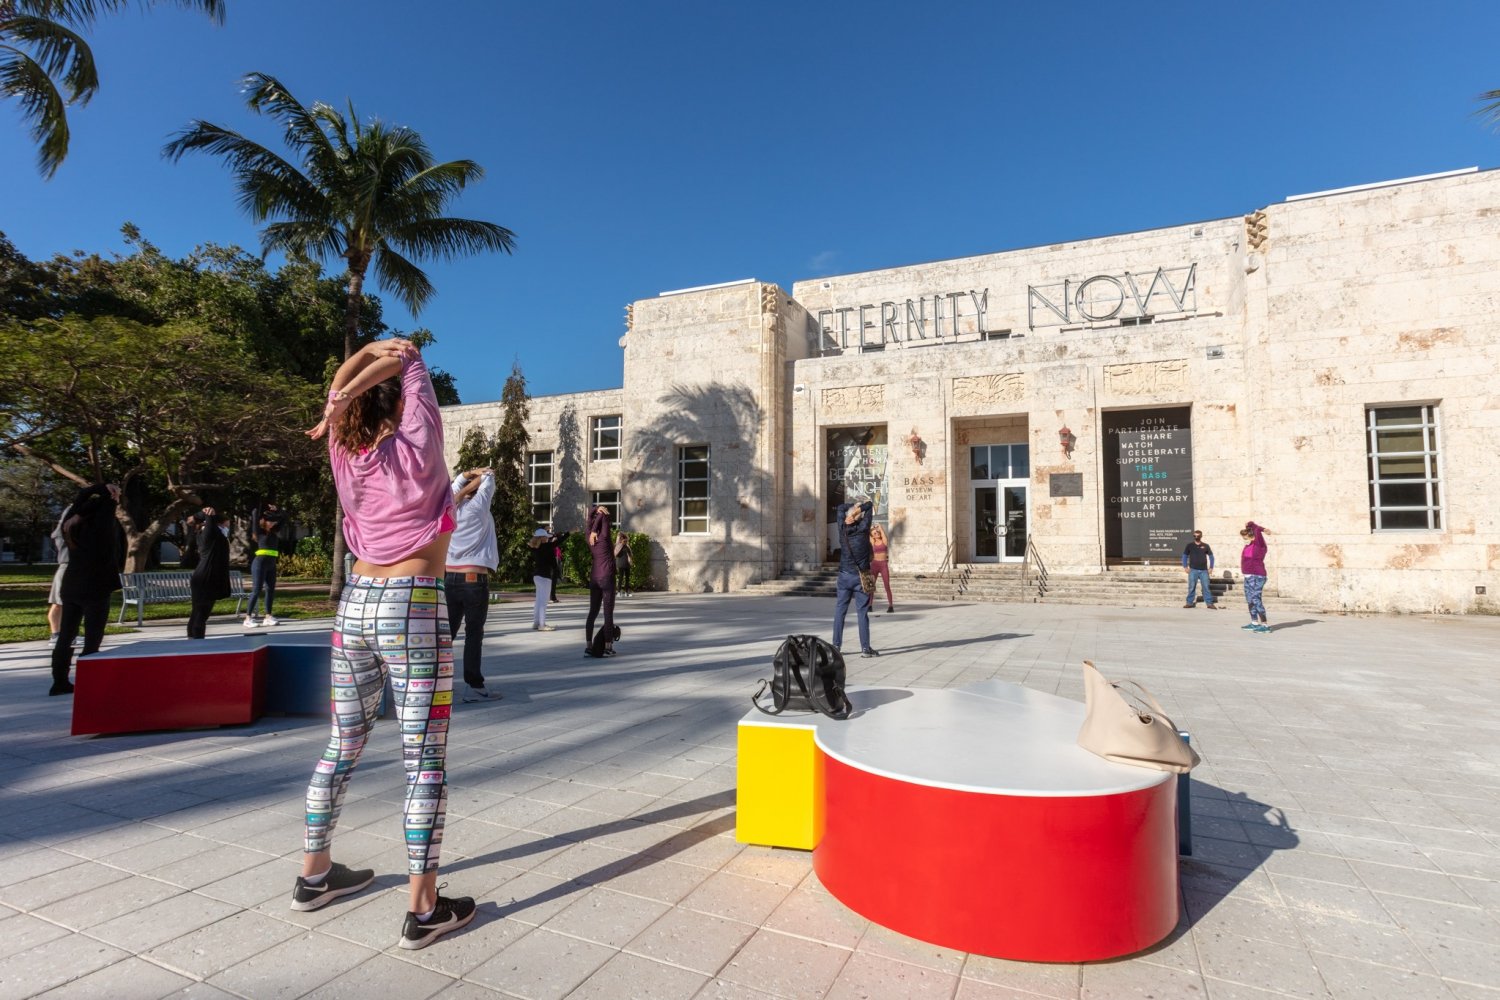 Best Museums in Miami